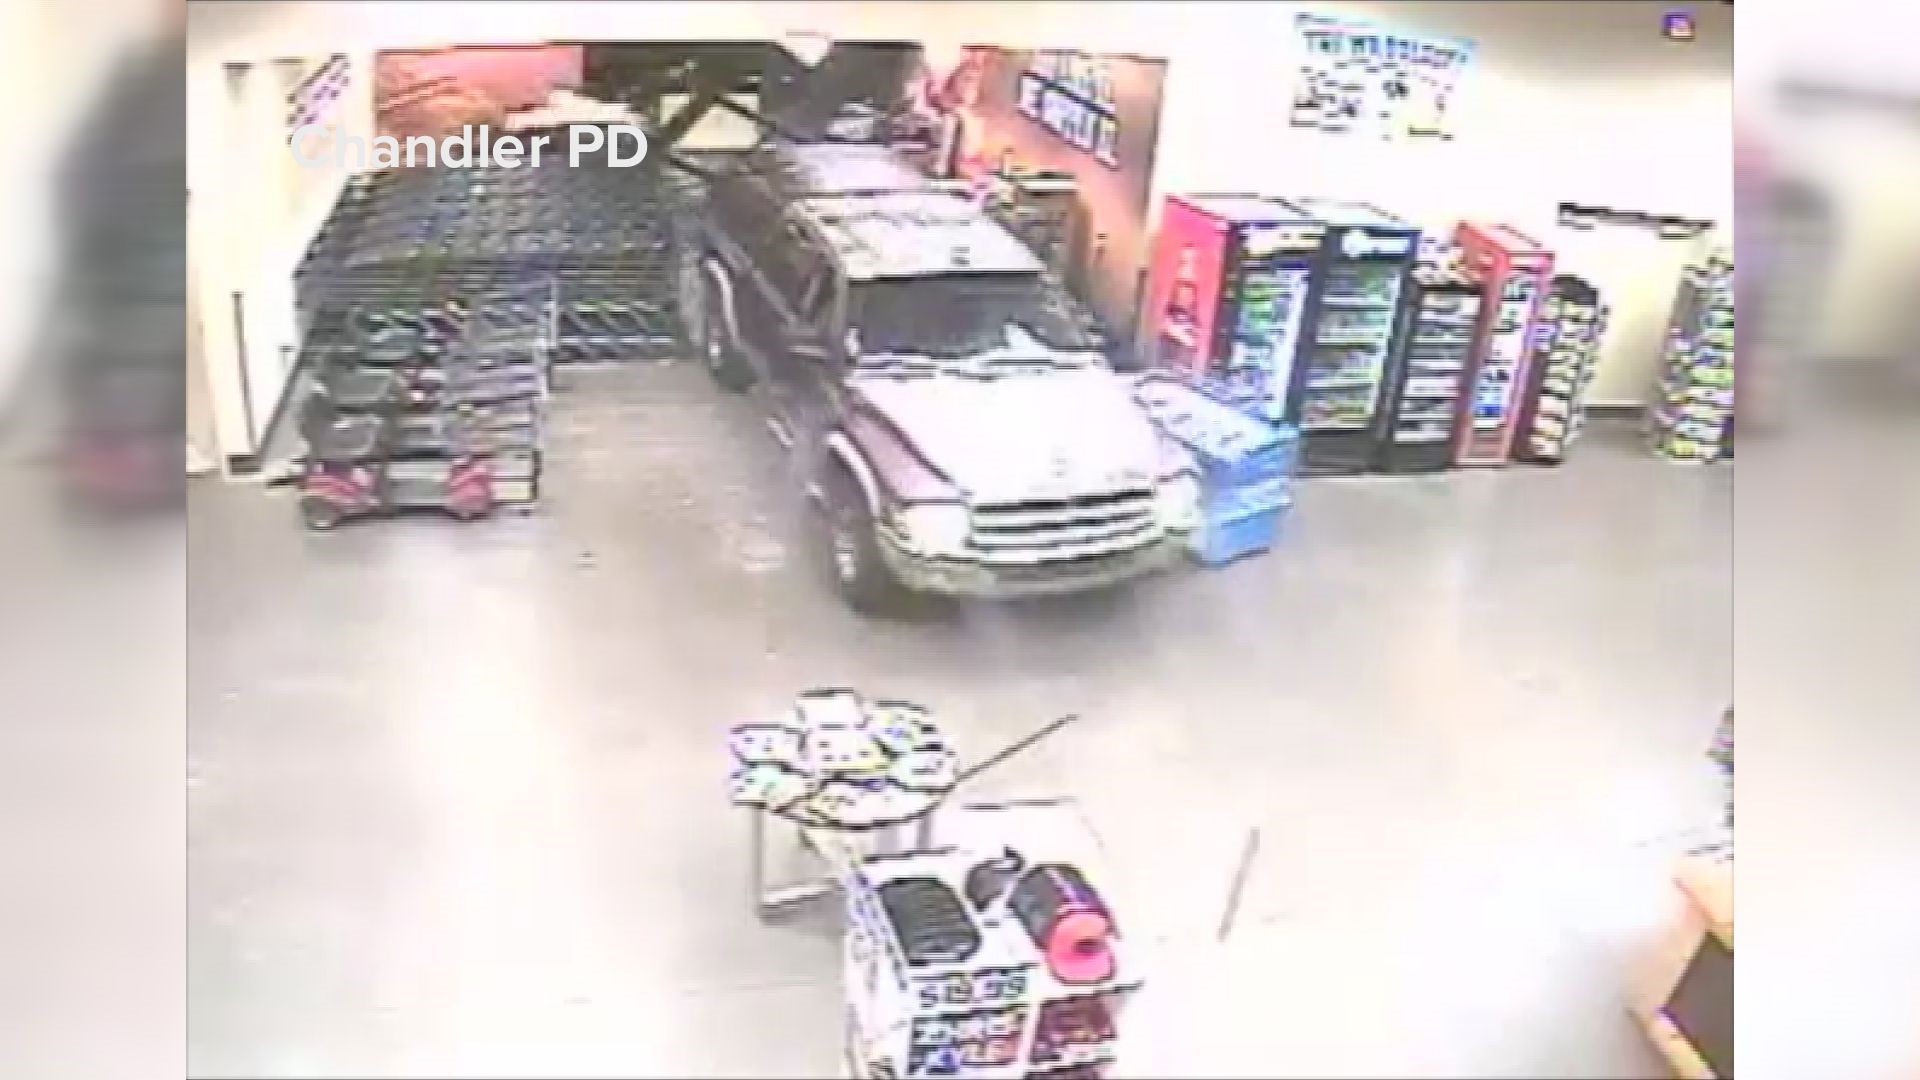 New video shows two alleged burglars driving a stolen pickup truck through the front doors of a Chandler supply store before stealing 21 guns. Police say both suspects were high on meth at the time. All the stolen guns have been recovered.